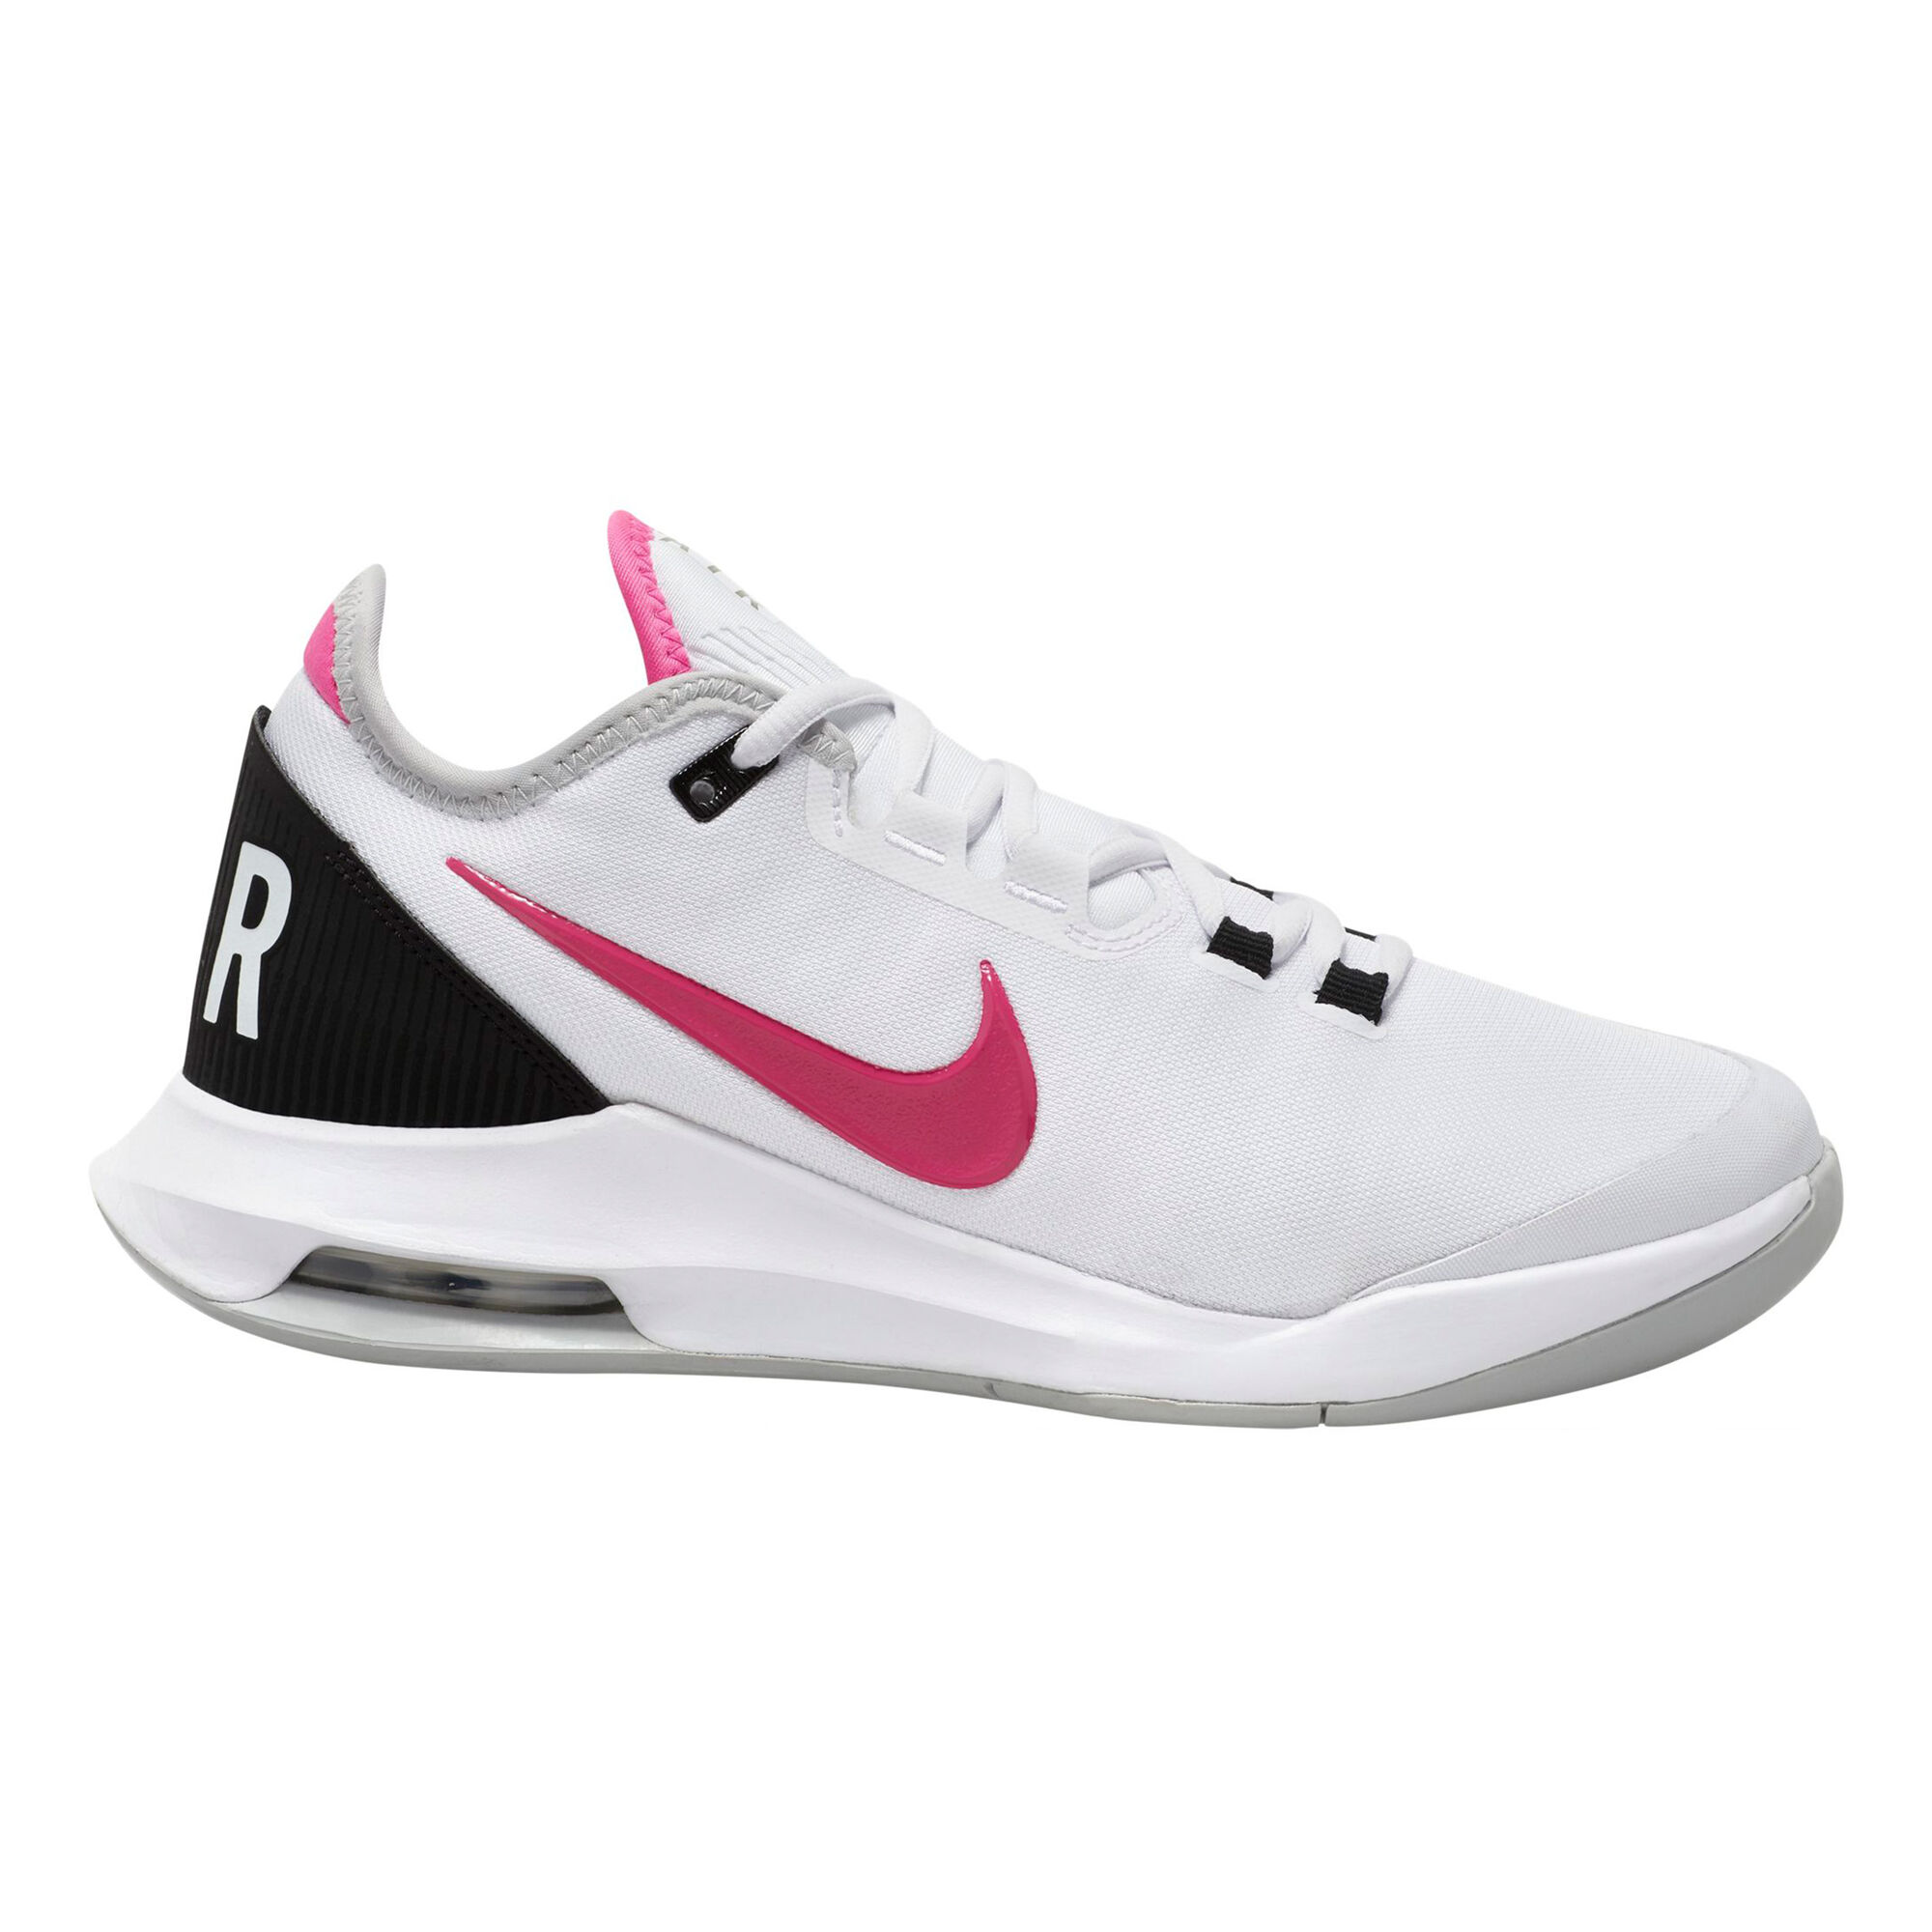 buy Nike Air Max Wildcard All Court Shoe Women White, Pink online